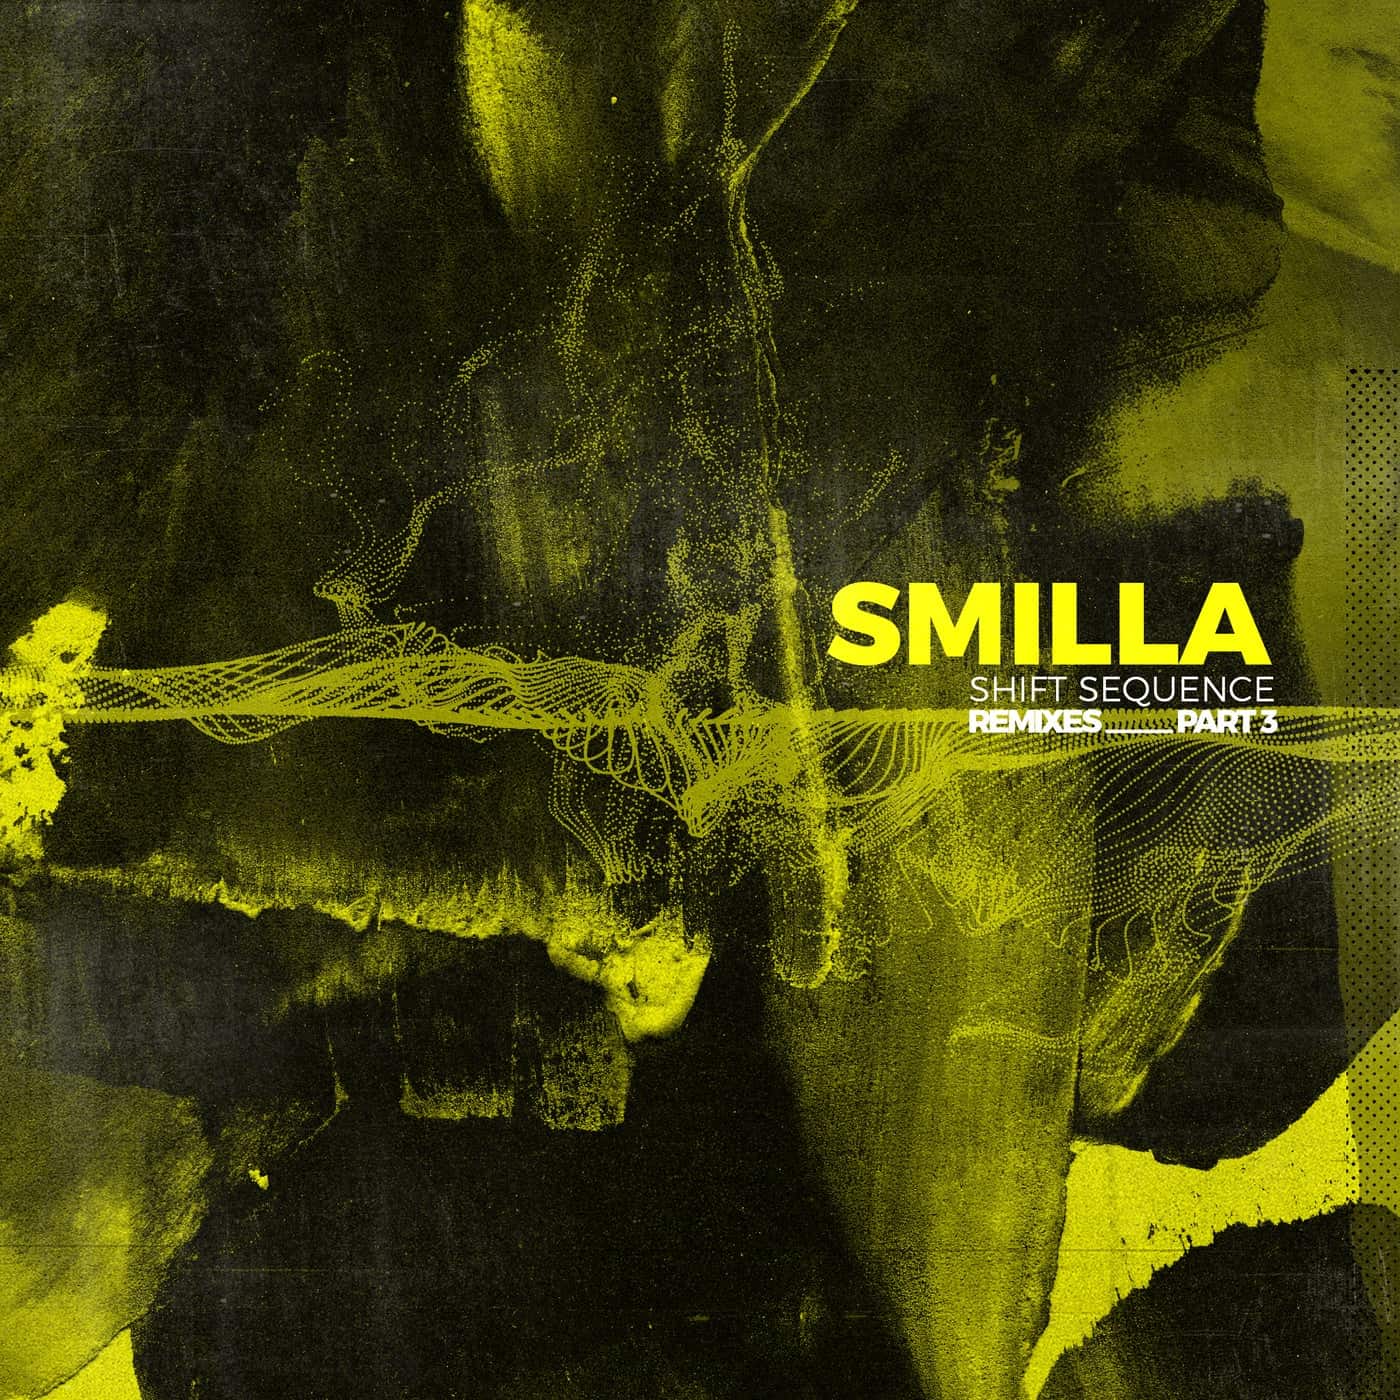 image cover: Smilla - Shift Sequence Remixes Part 3 / HHBER036C